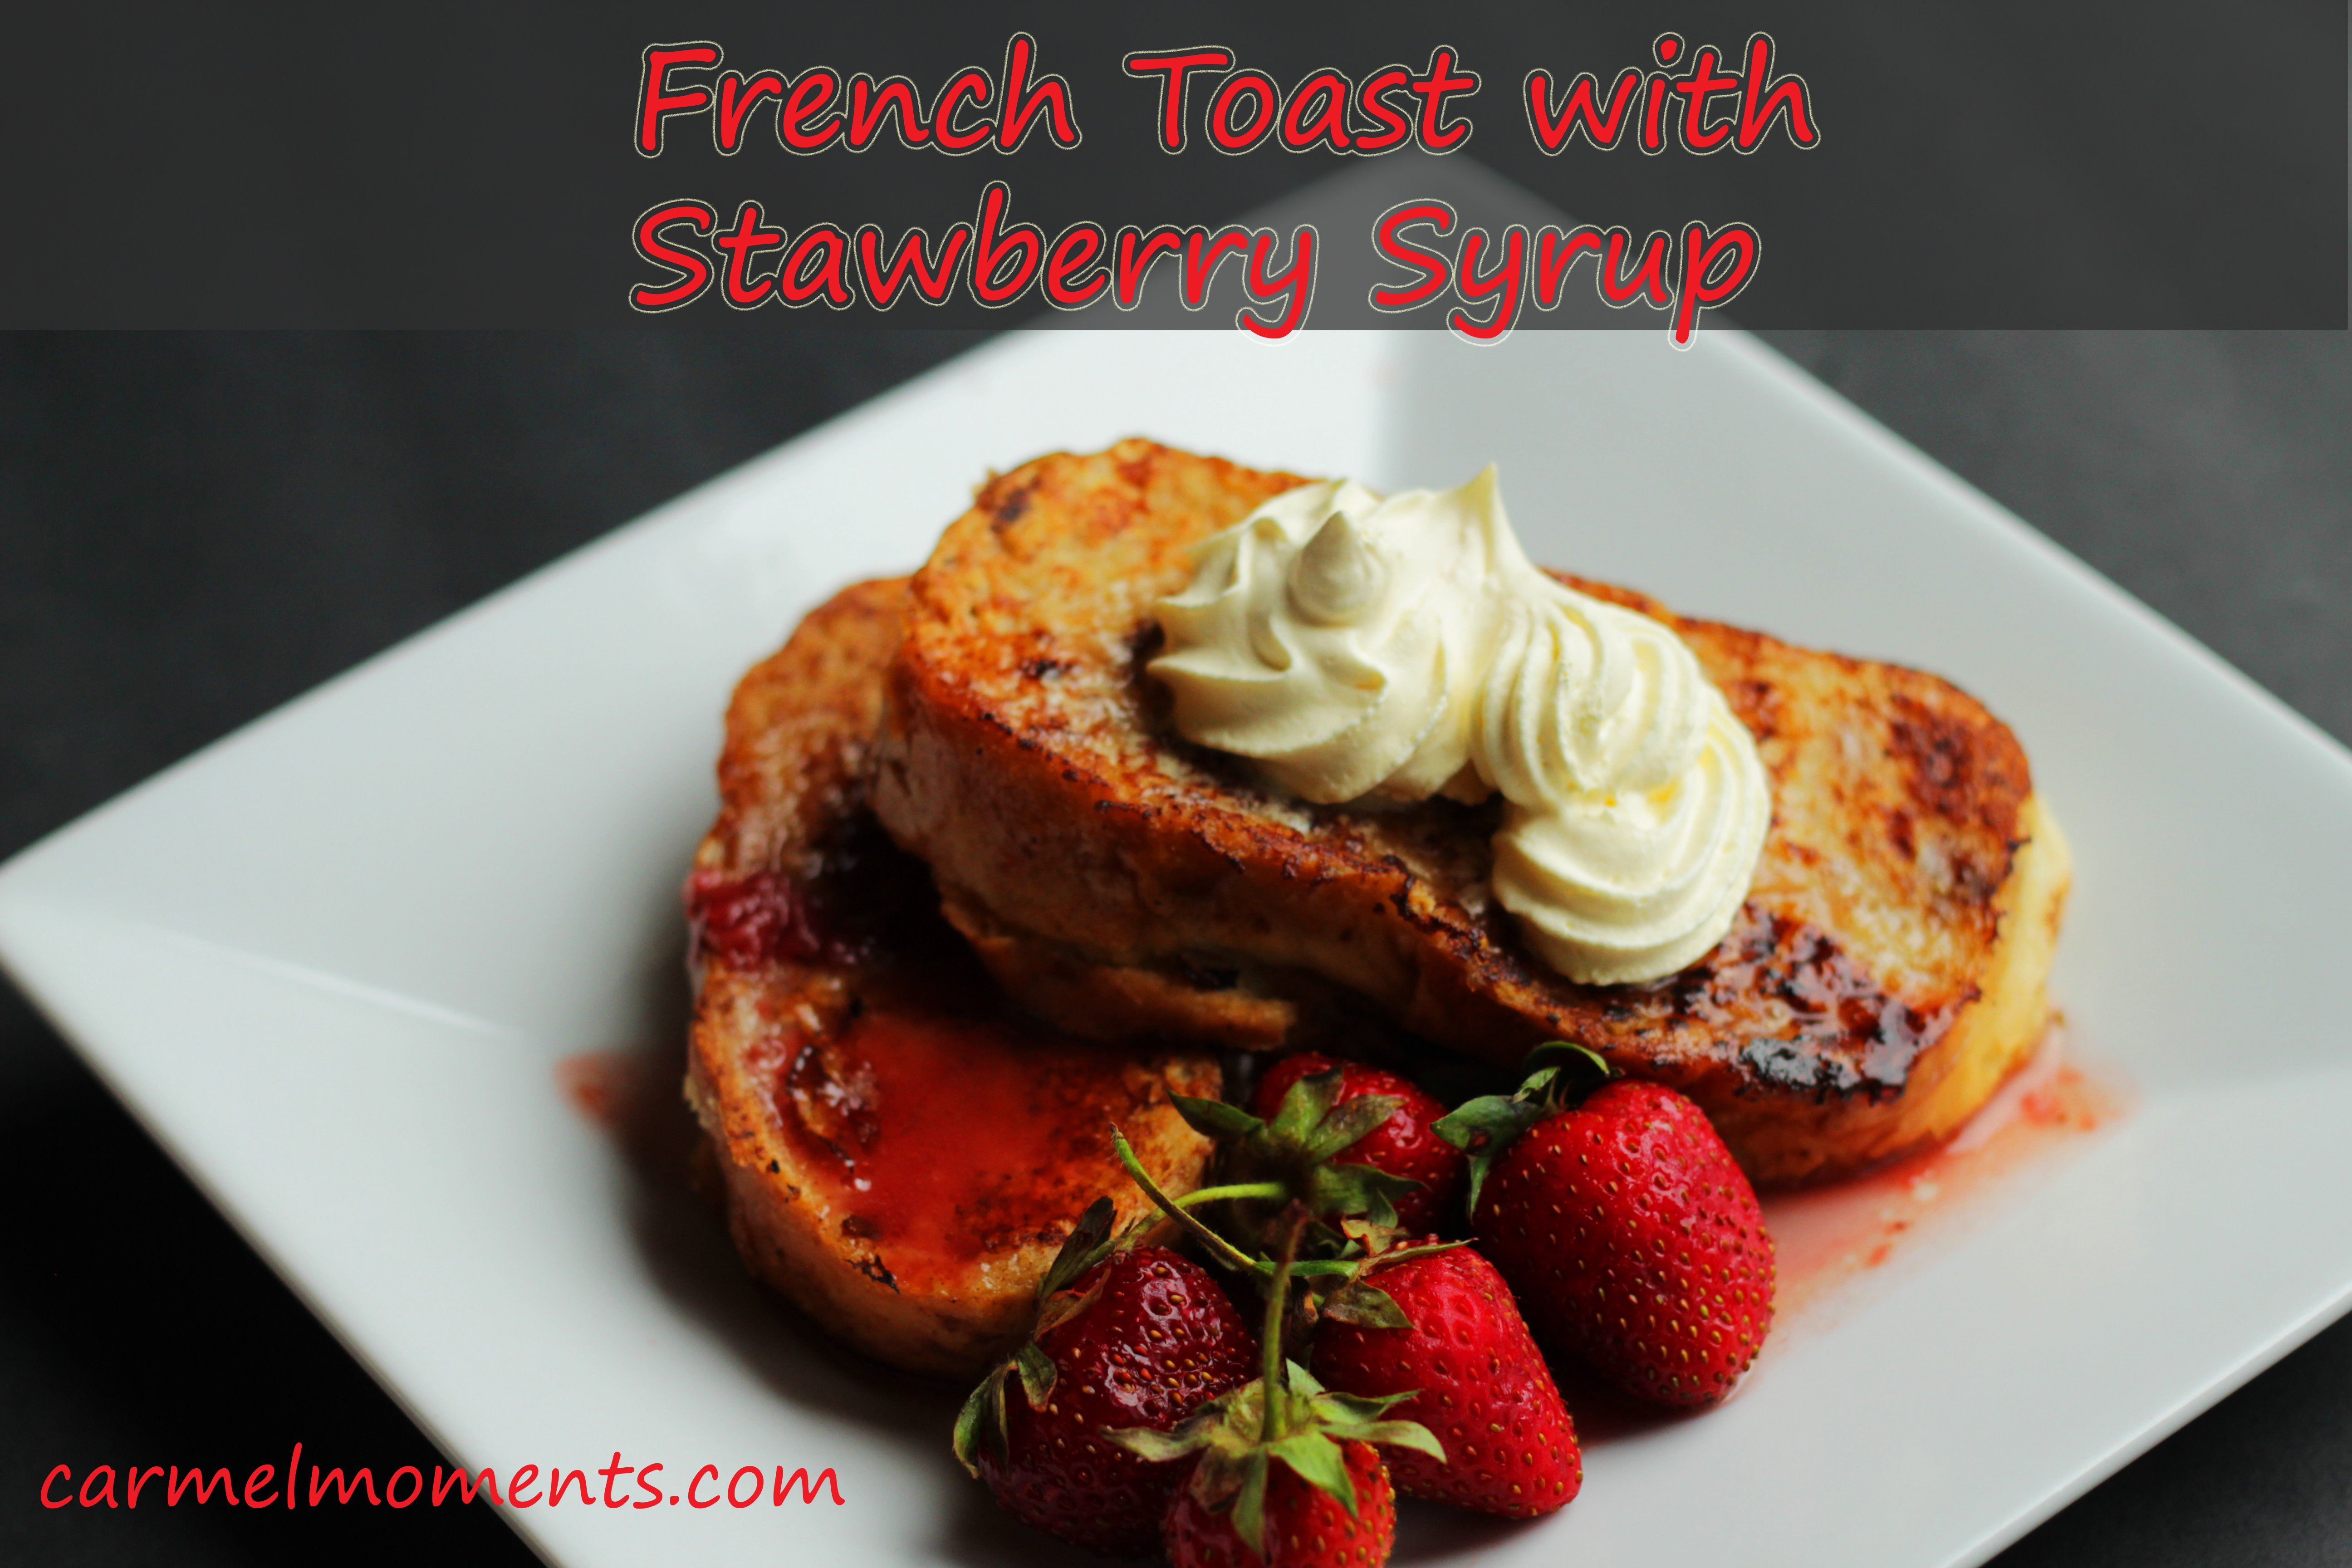 French Toast with Strawberry Syrup